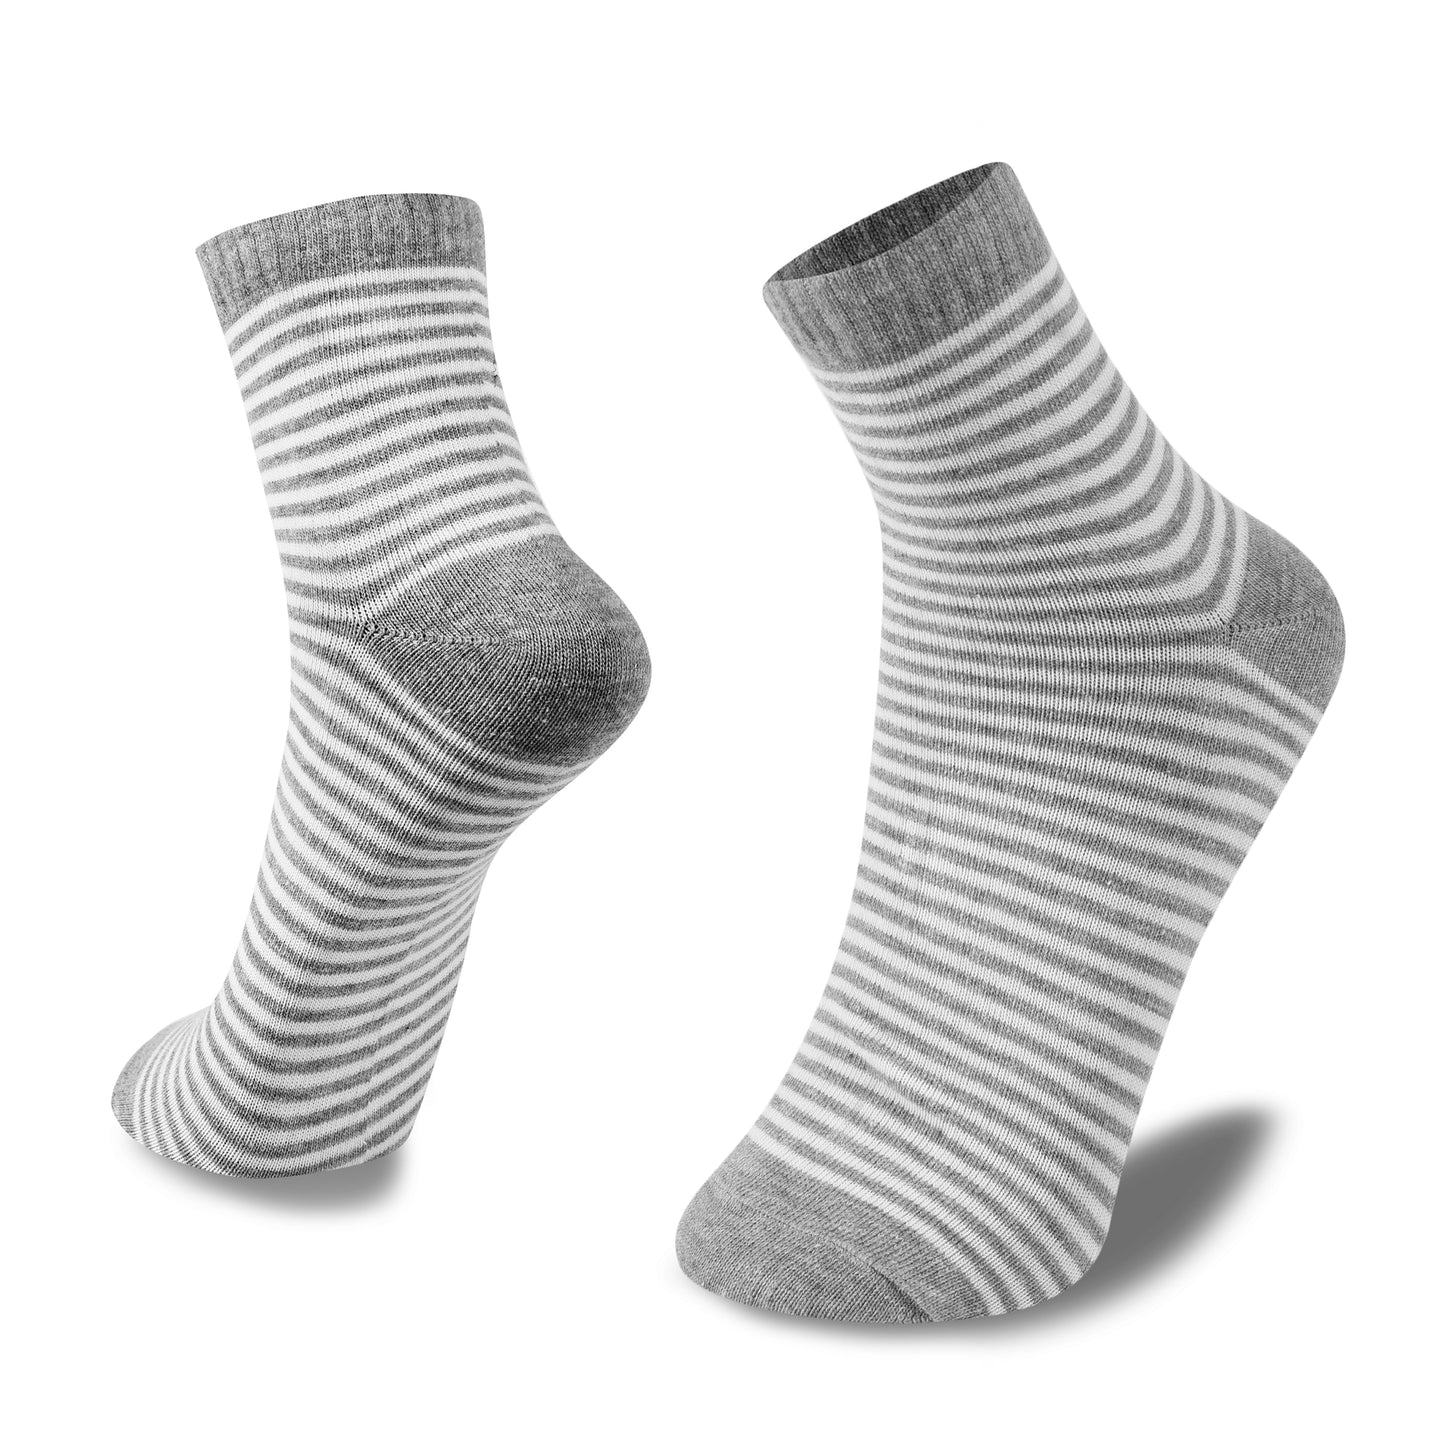 Women's Ankle Socks White & Grey Stripes -Pack of 3 pairs